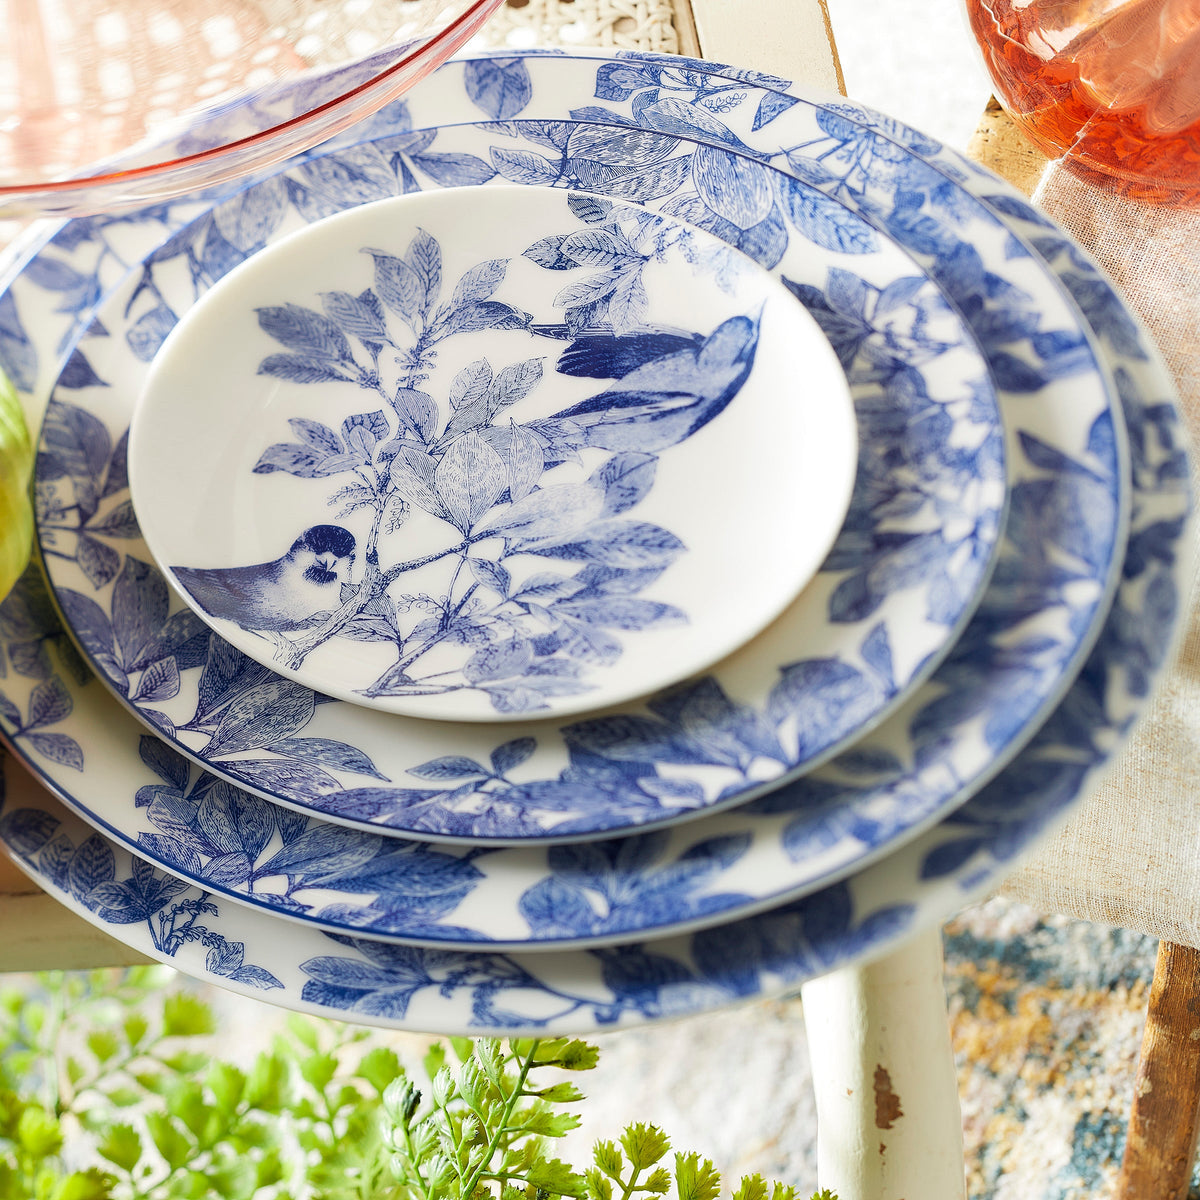 A stack of four blue and white bone china plates with intricate bird and foliage designs. The plates, showcasing exquisite botanical details, are arranged from largest to smallest. These are the Arbor Rimmed Charger Plates by Caskata Artisanal Home.